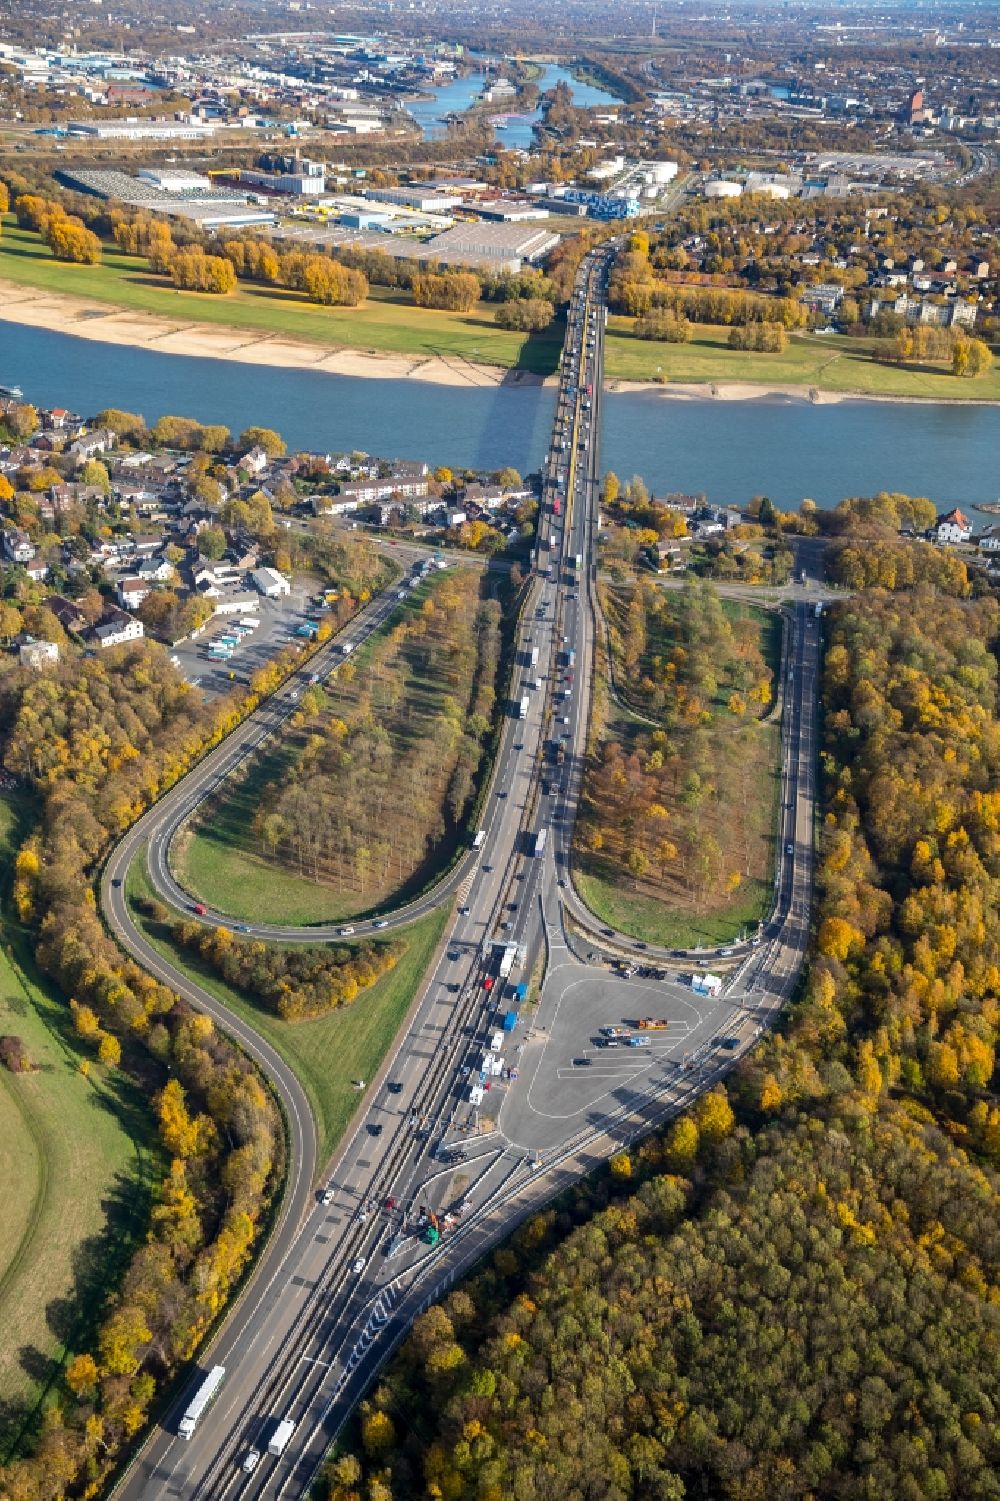 Aerial image Duisburg - Routing and traffic lanes over the highway bridge in the motorway A 40 ueber dem Rhein in Duisburg in the state North Rhine-Westphalia, Germany